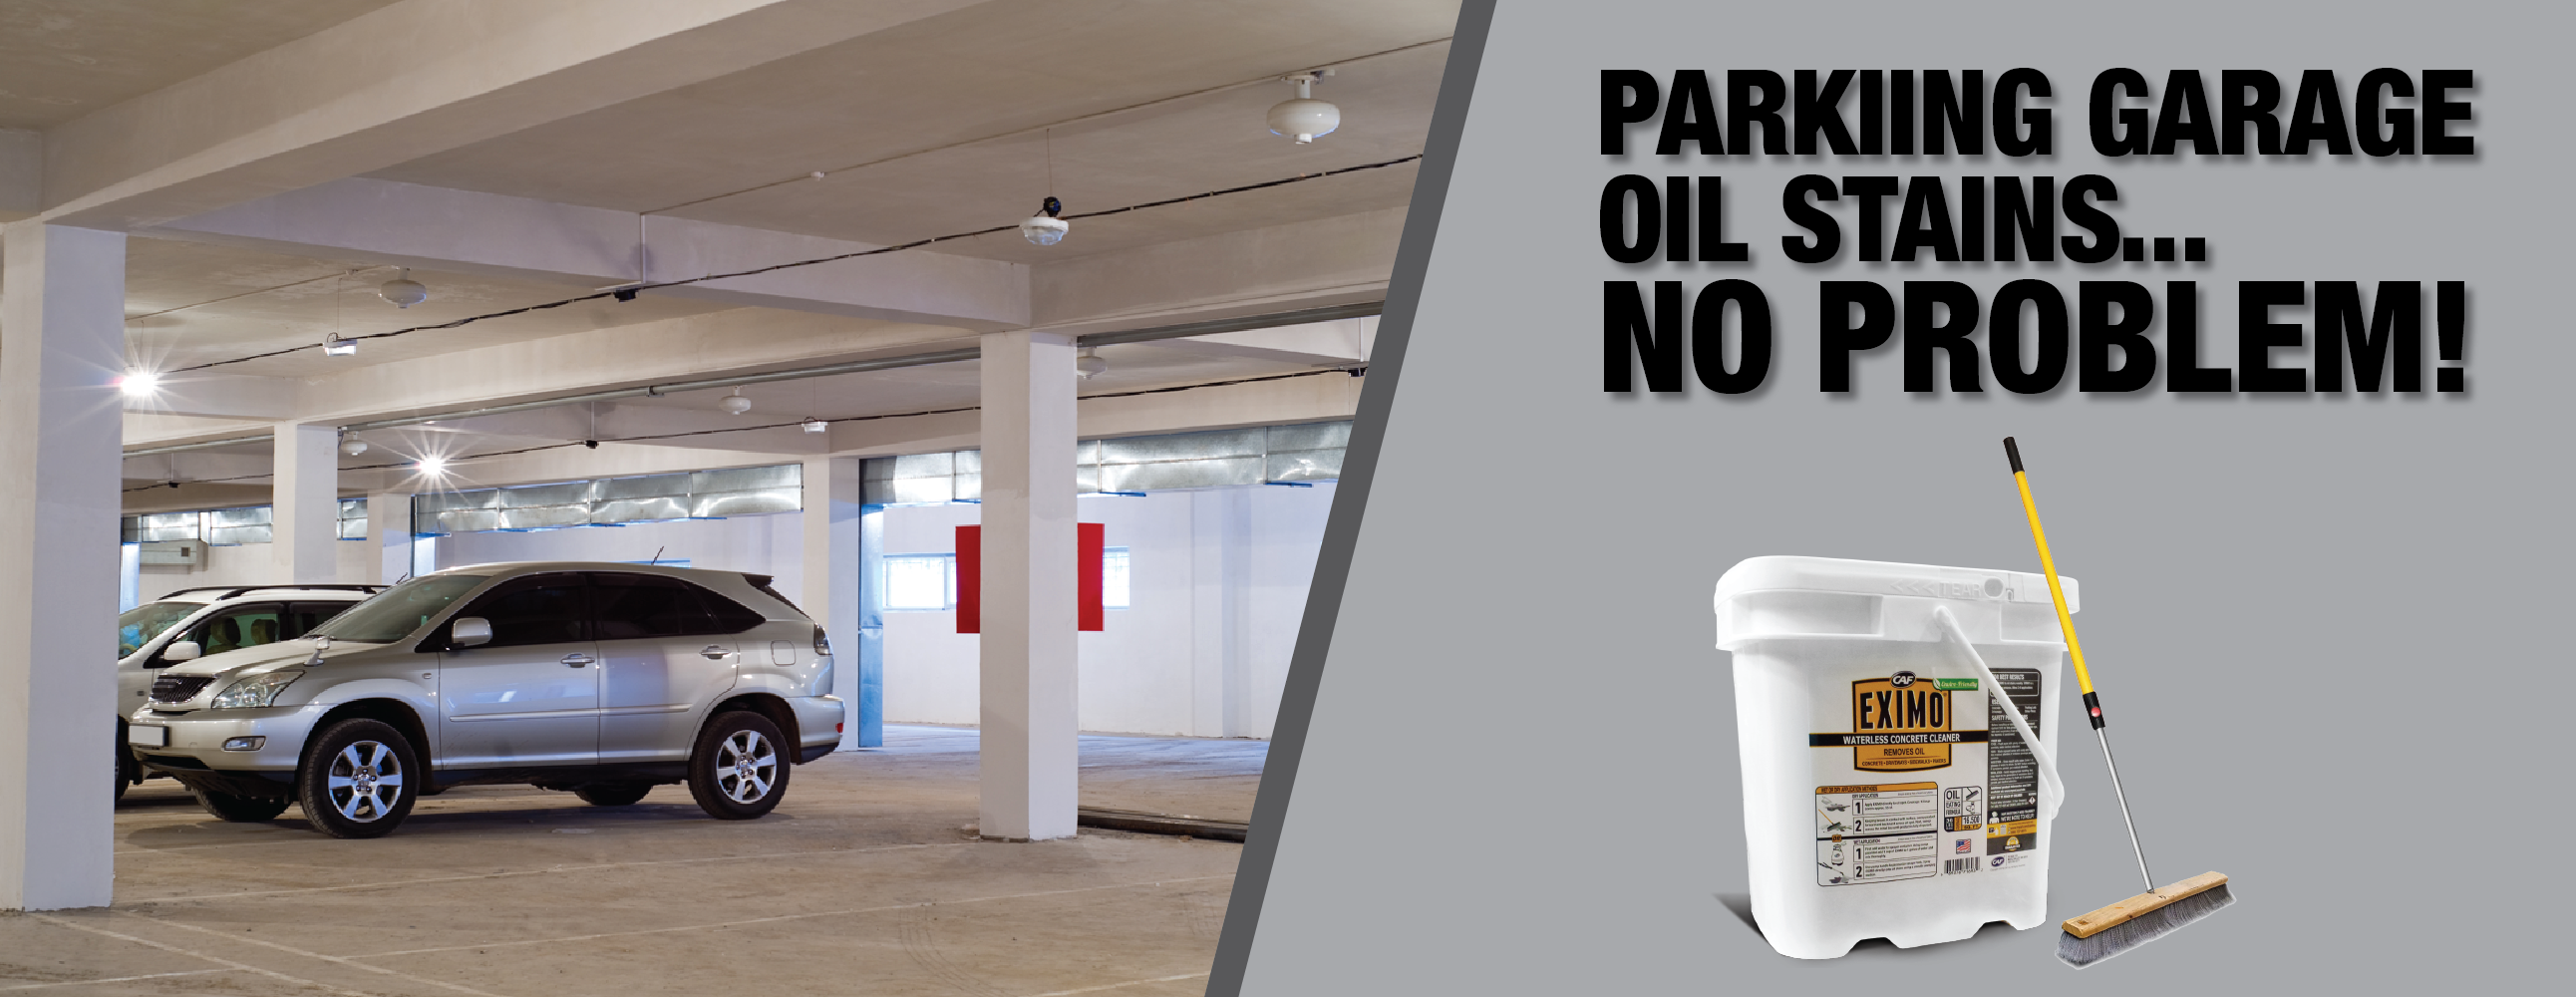 How to Remove Oil Stains from Parking Garage